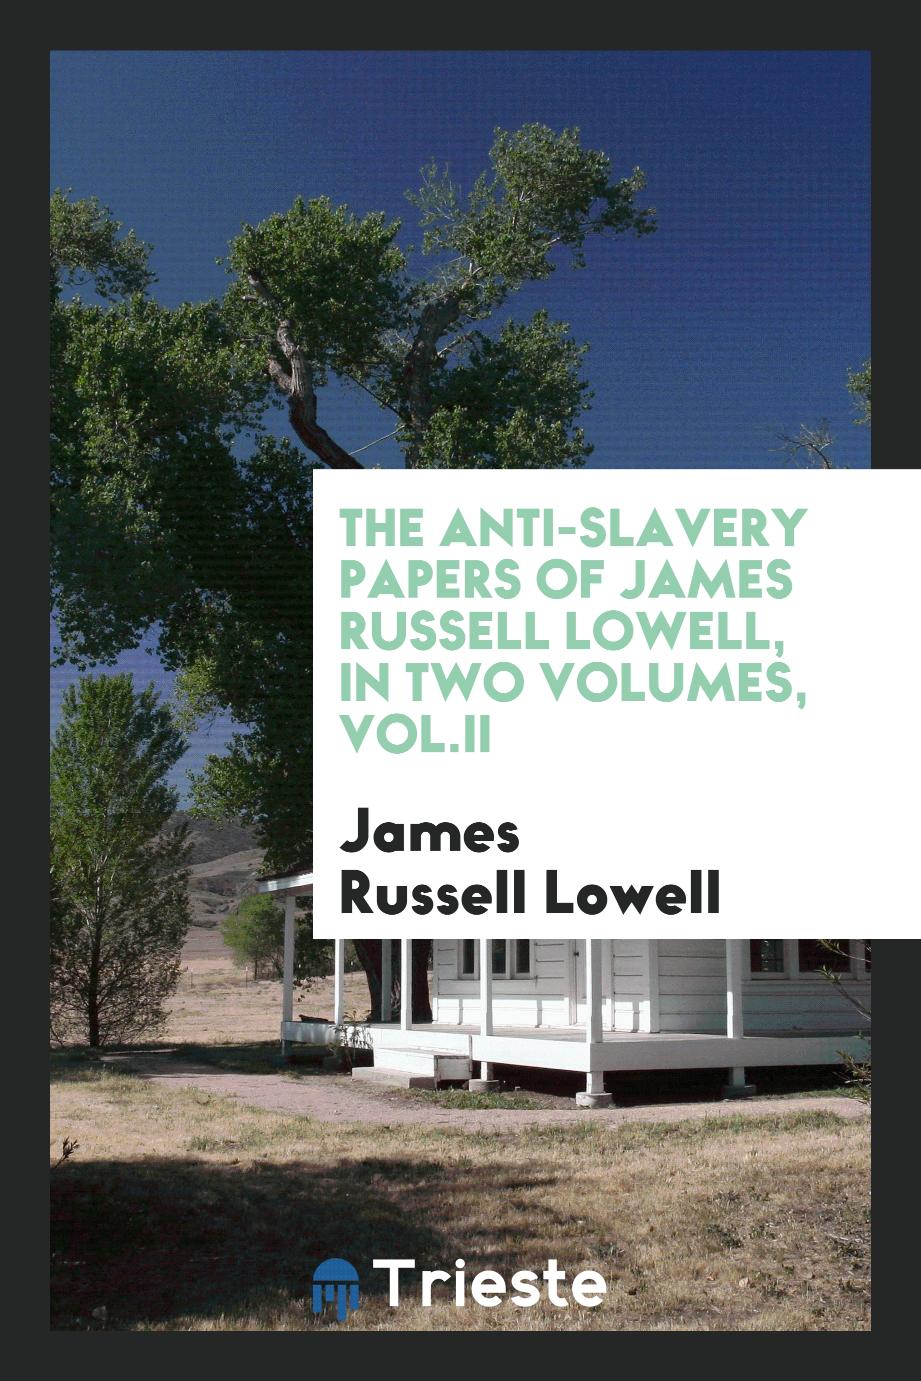 The anti-slavery papers of James Russell Lowell, in two volumes, Vol.II